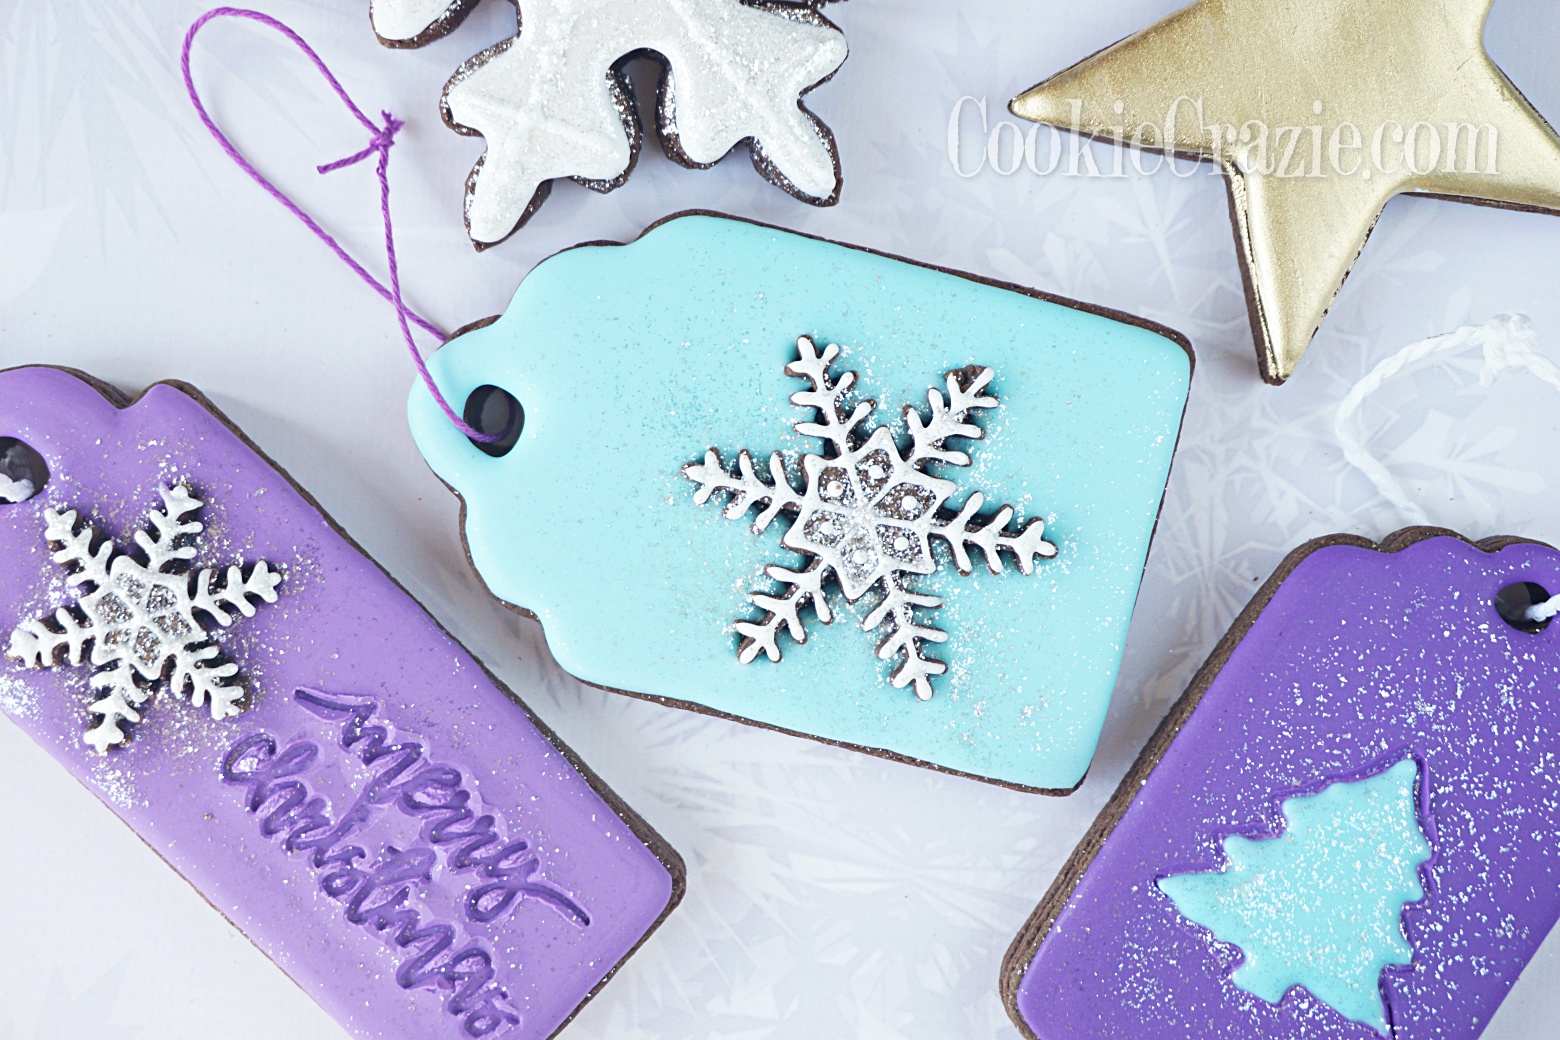  Snowflake Gift Tag Decorated Sugar Cookie YouTube video  HERE  